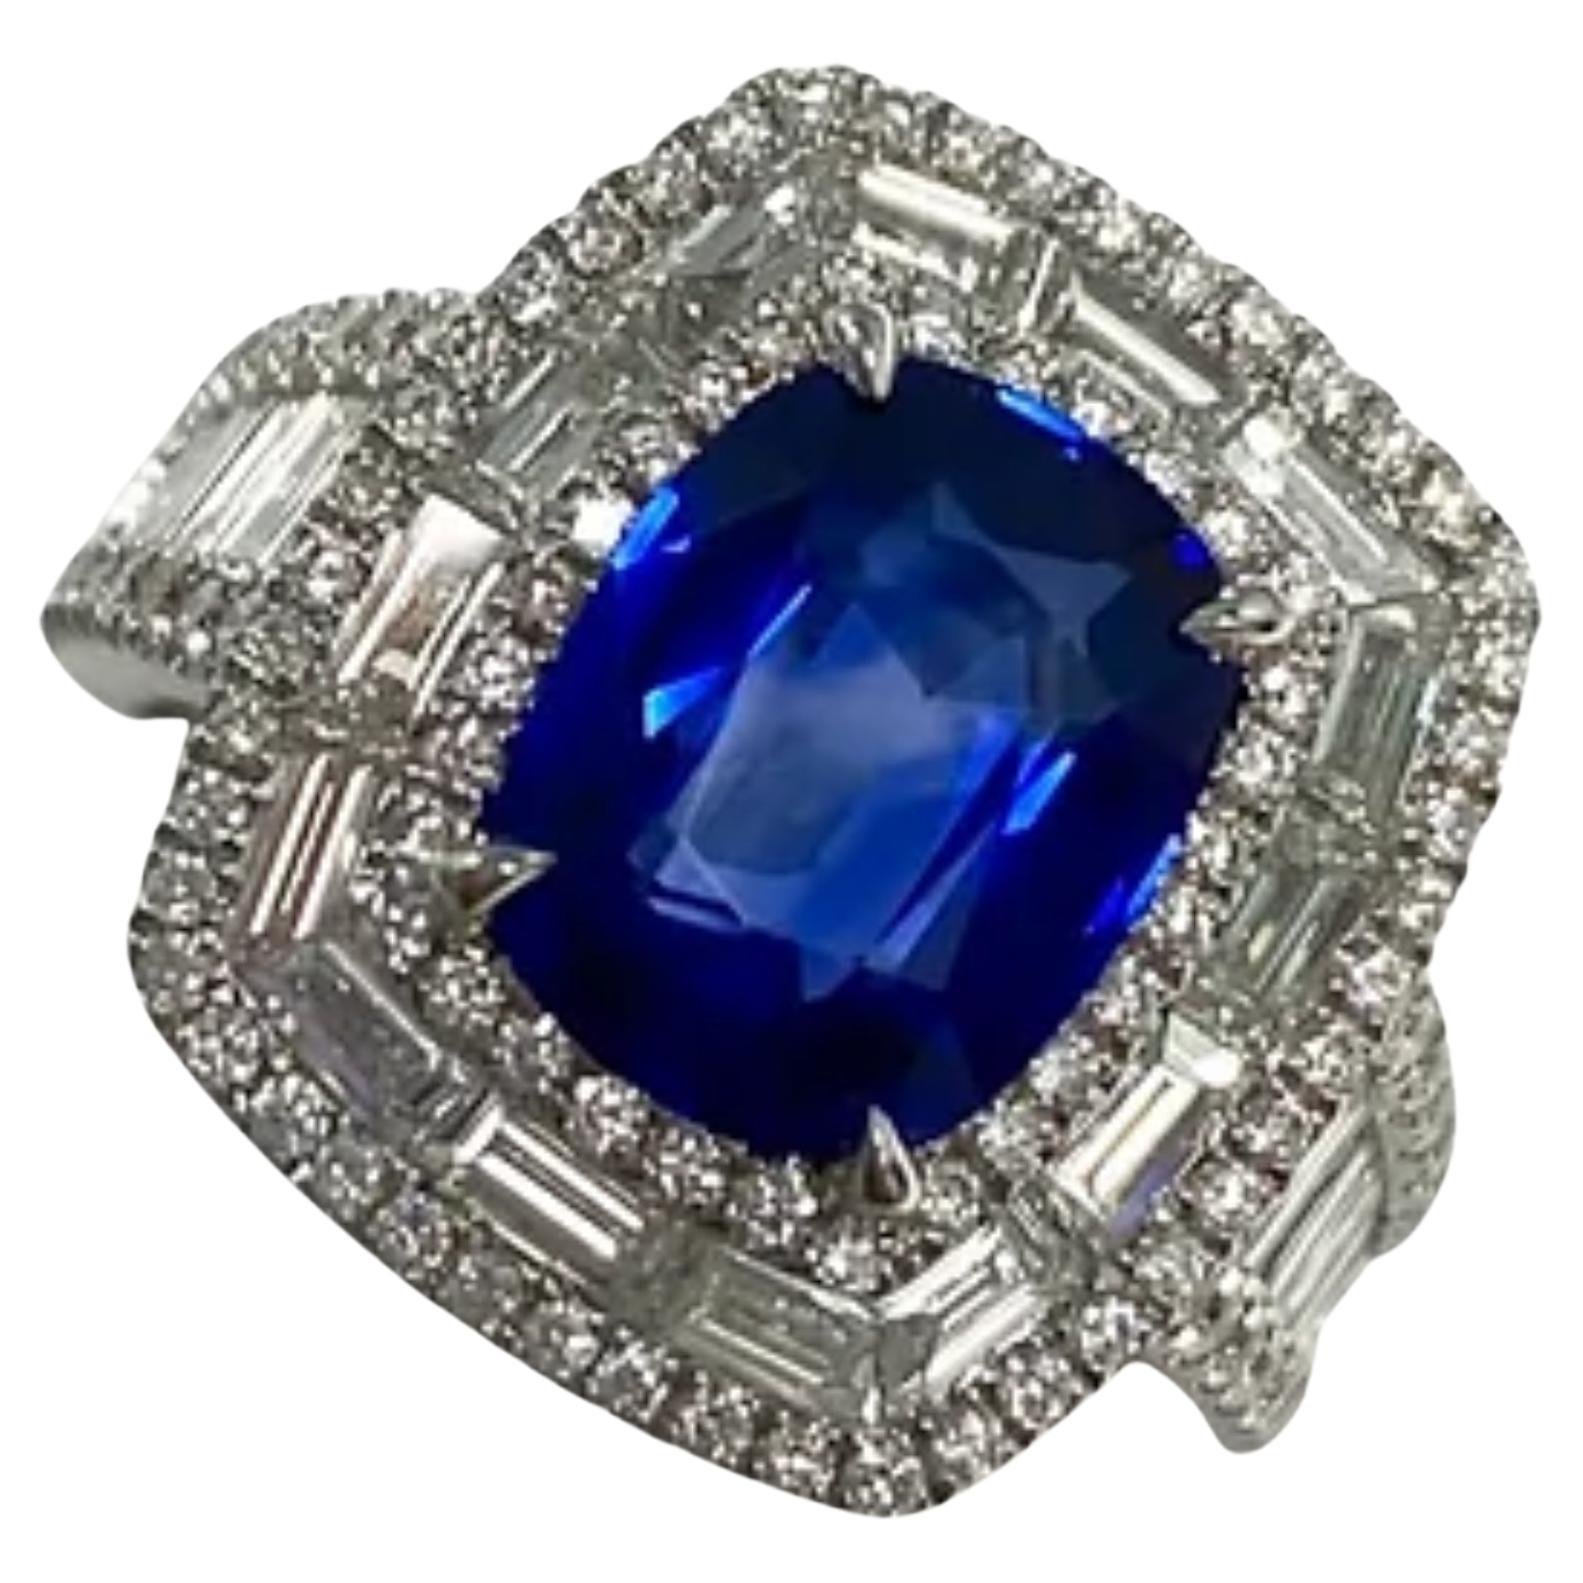 For Sale:  Antique 3 CT Natural Sapphire Diamond Engagement Band in 18K Gold, Cocktail Ring